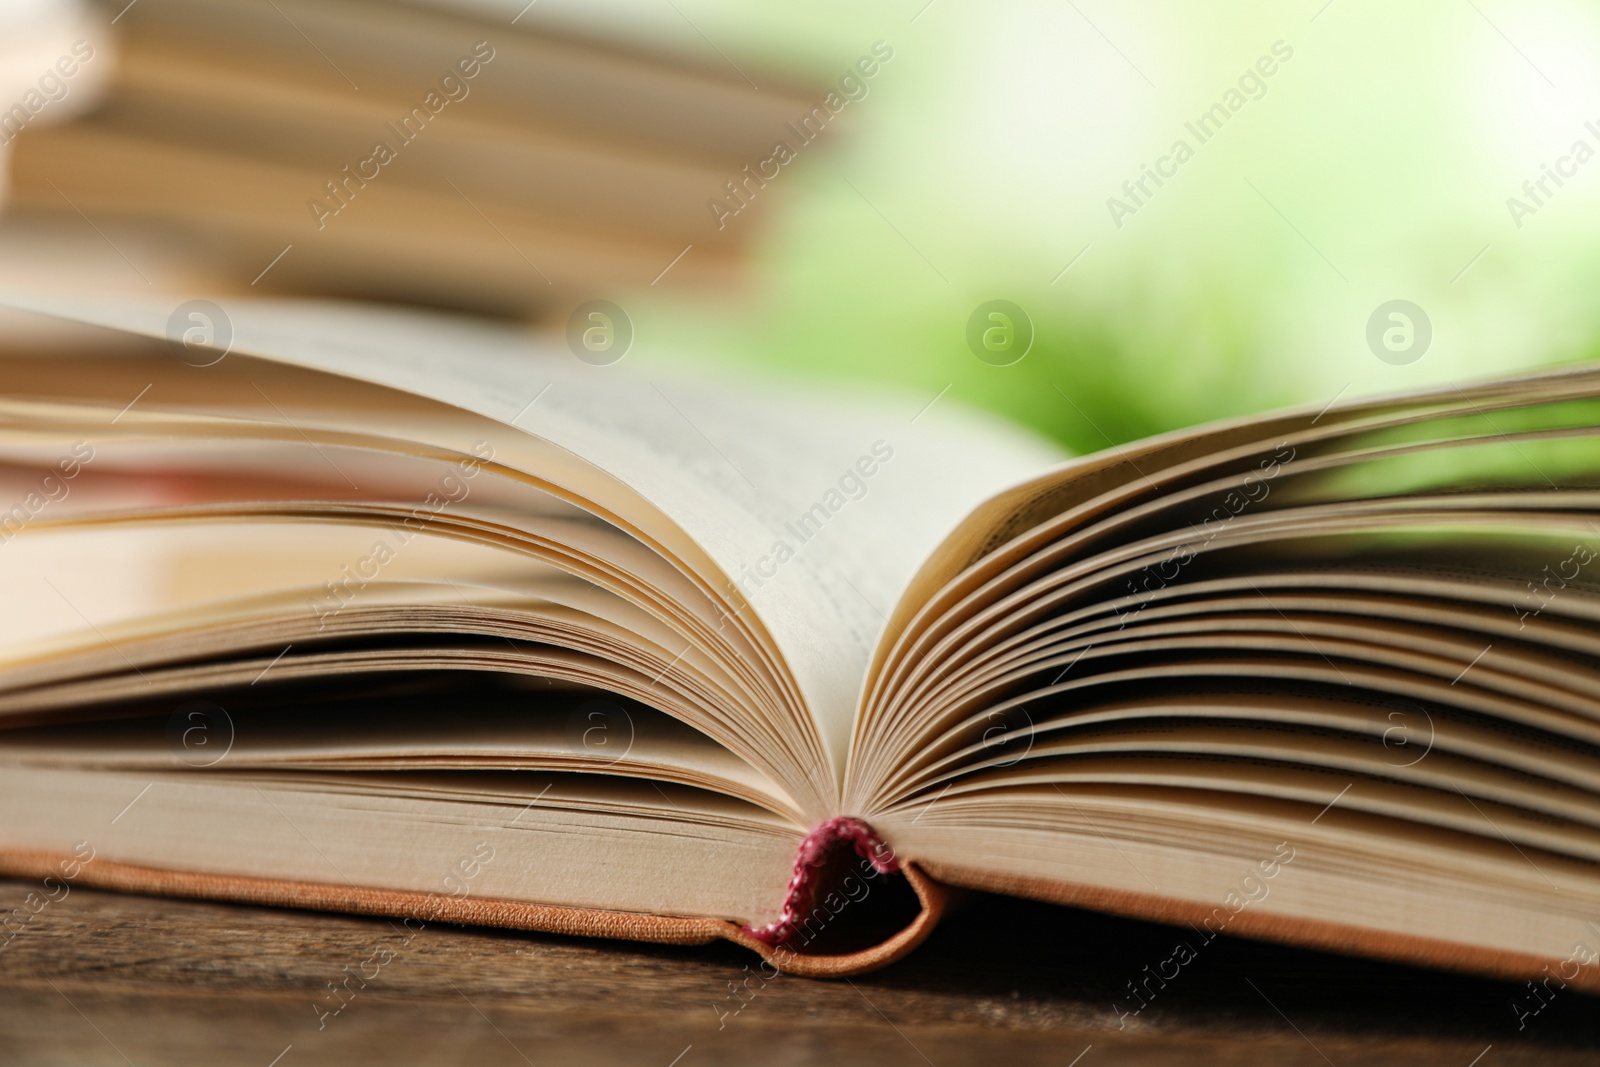 Photo of Open hardcover book on wooden table against blurred background, closeup